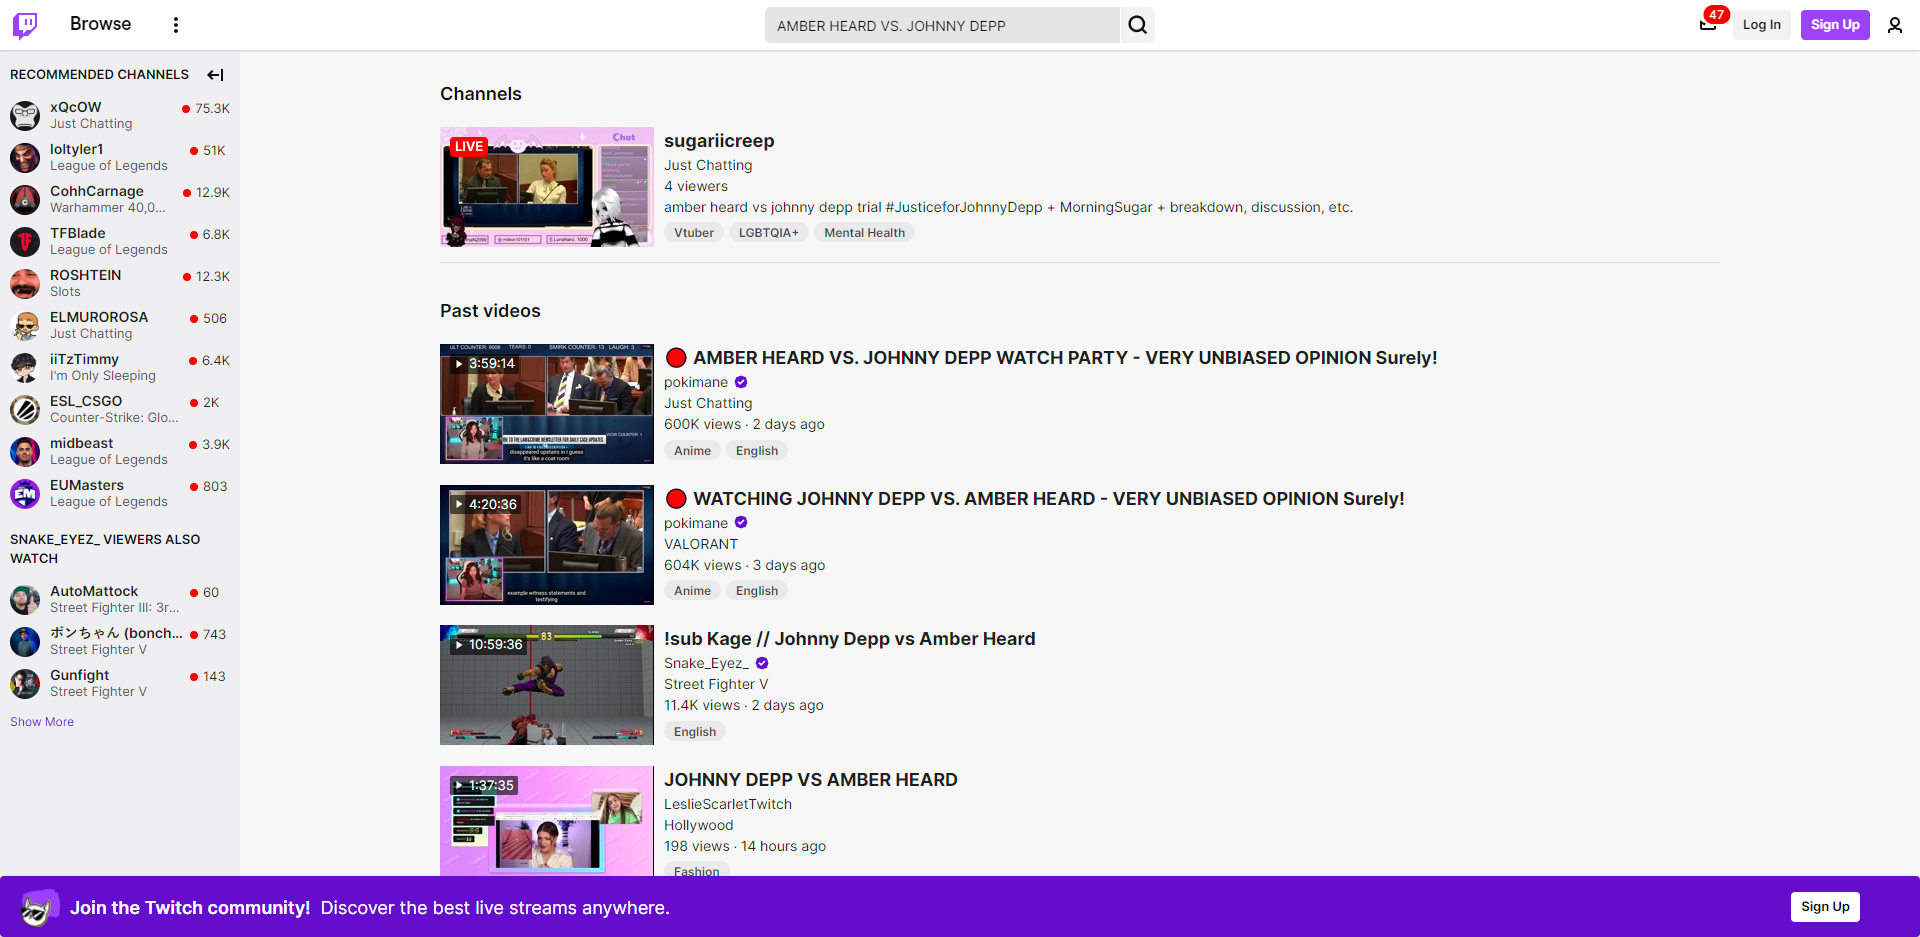 Search results for "AMBER HEARD VS. JOHNNY DEPP" on Twitch. Source: twitch.tv. A screenshot by To The Moon